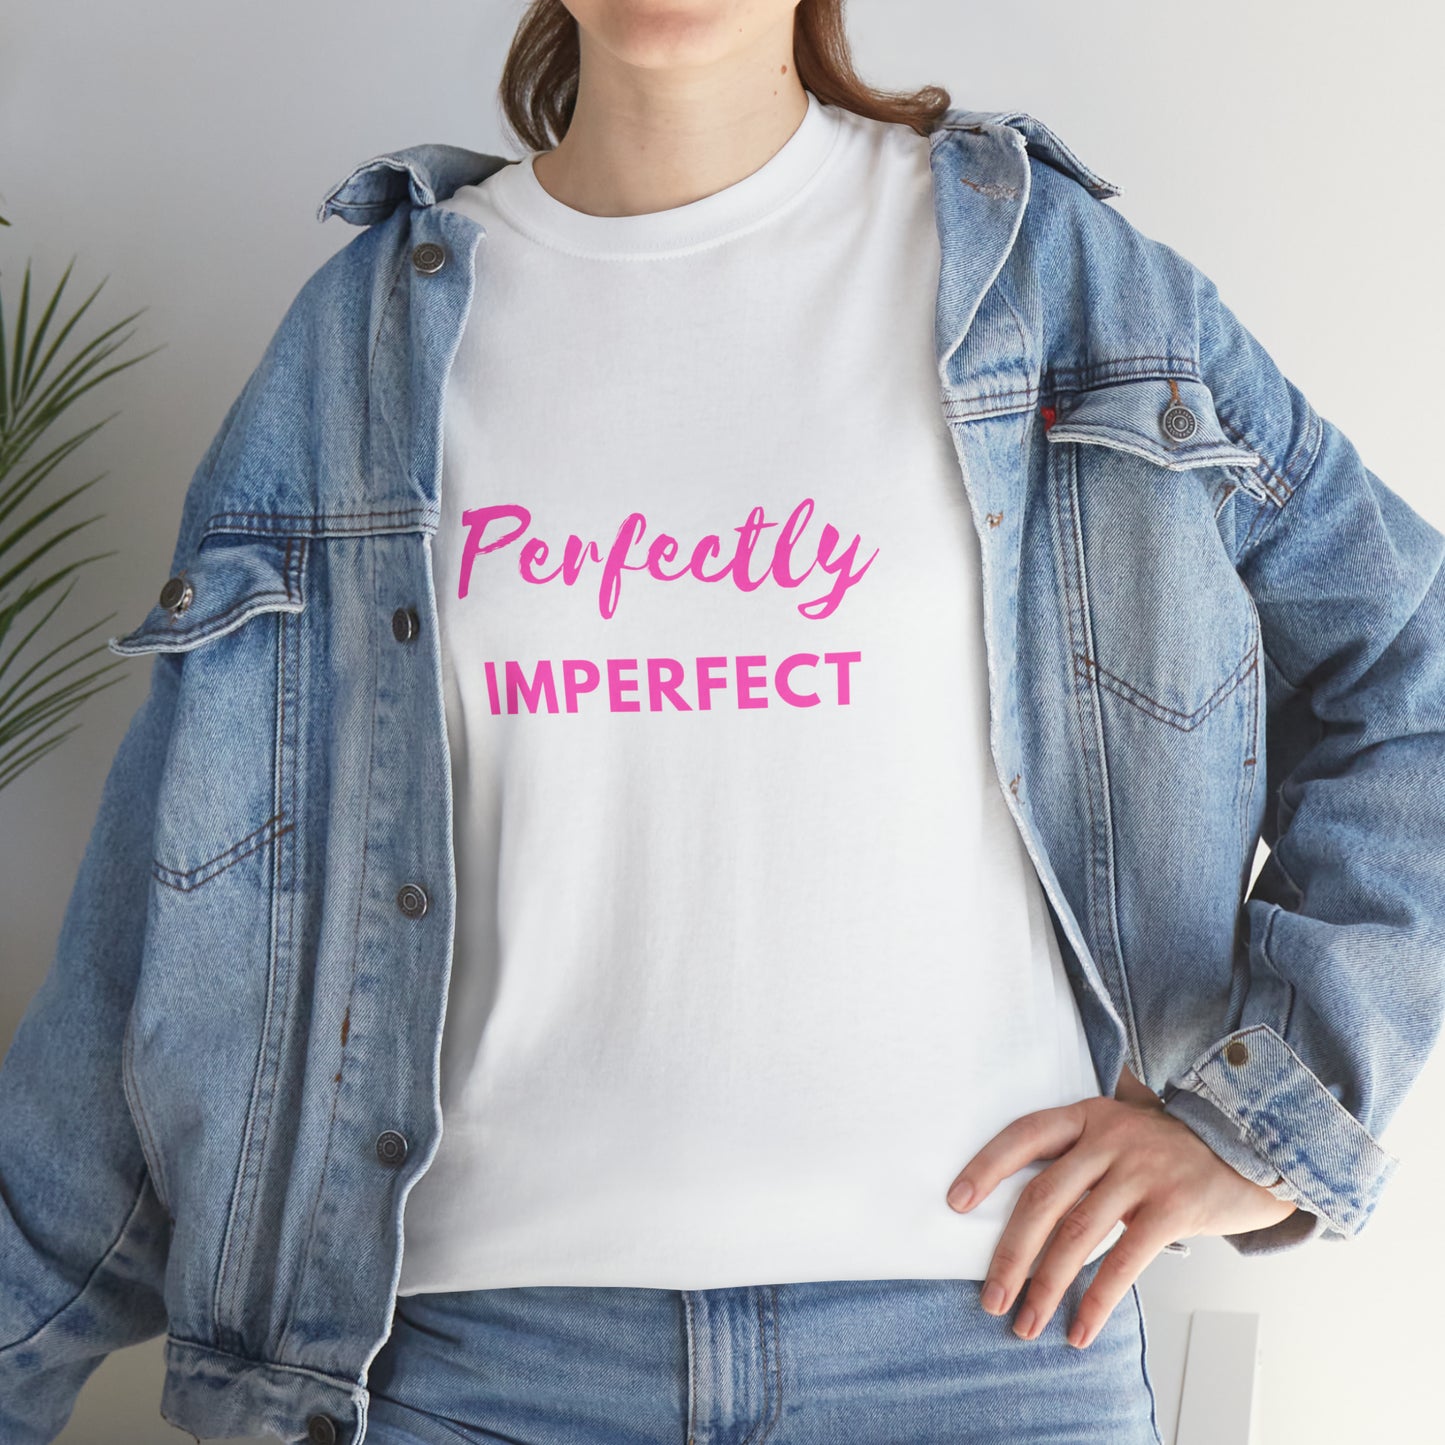 "Perfectly Imperfect" T-shirt